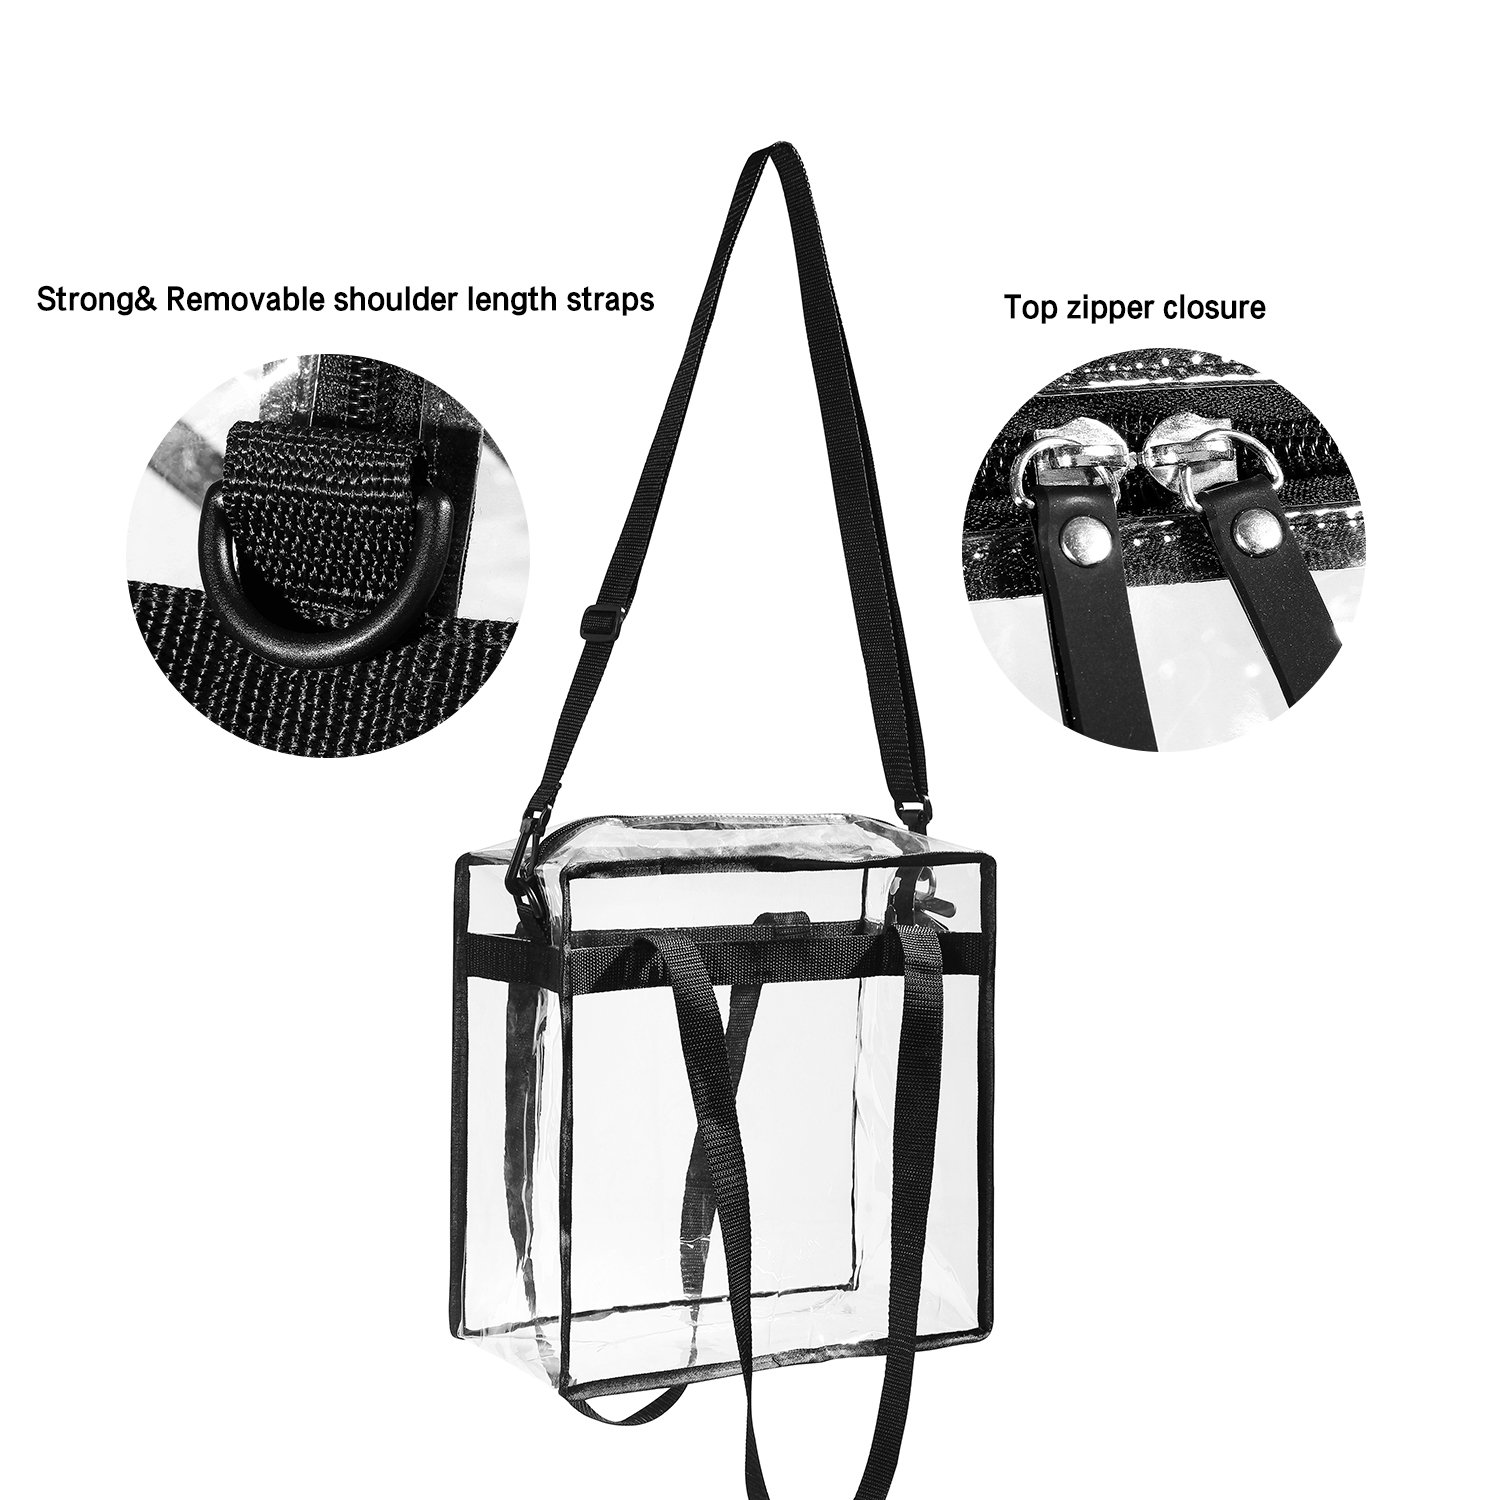 BAGAIL Clear bags Stadium Approved Clear Tote Bag with Zipper Closure Crossbody Messenger Shoulder Bag with Adjustable Strap(12 